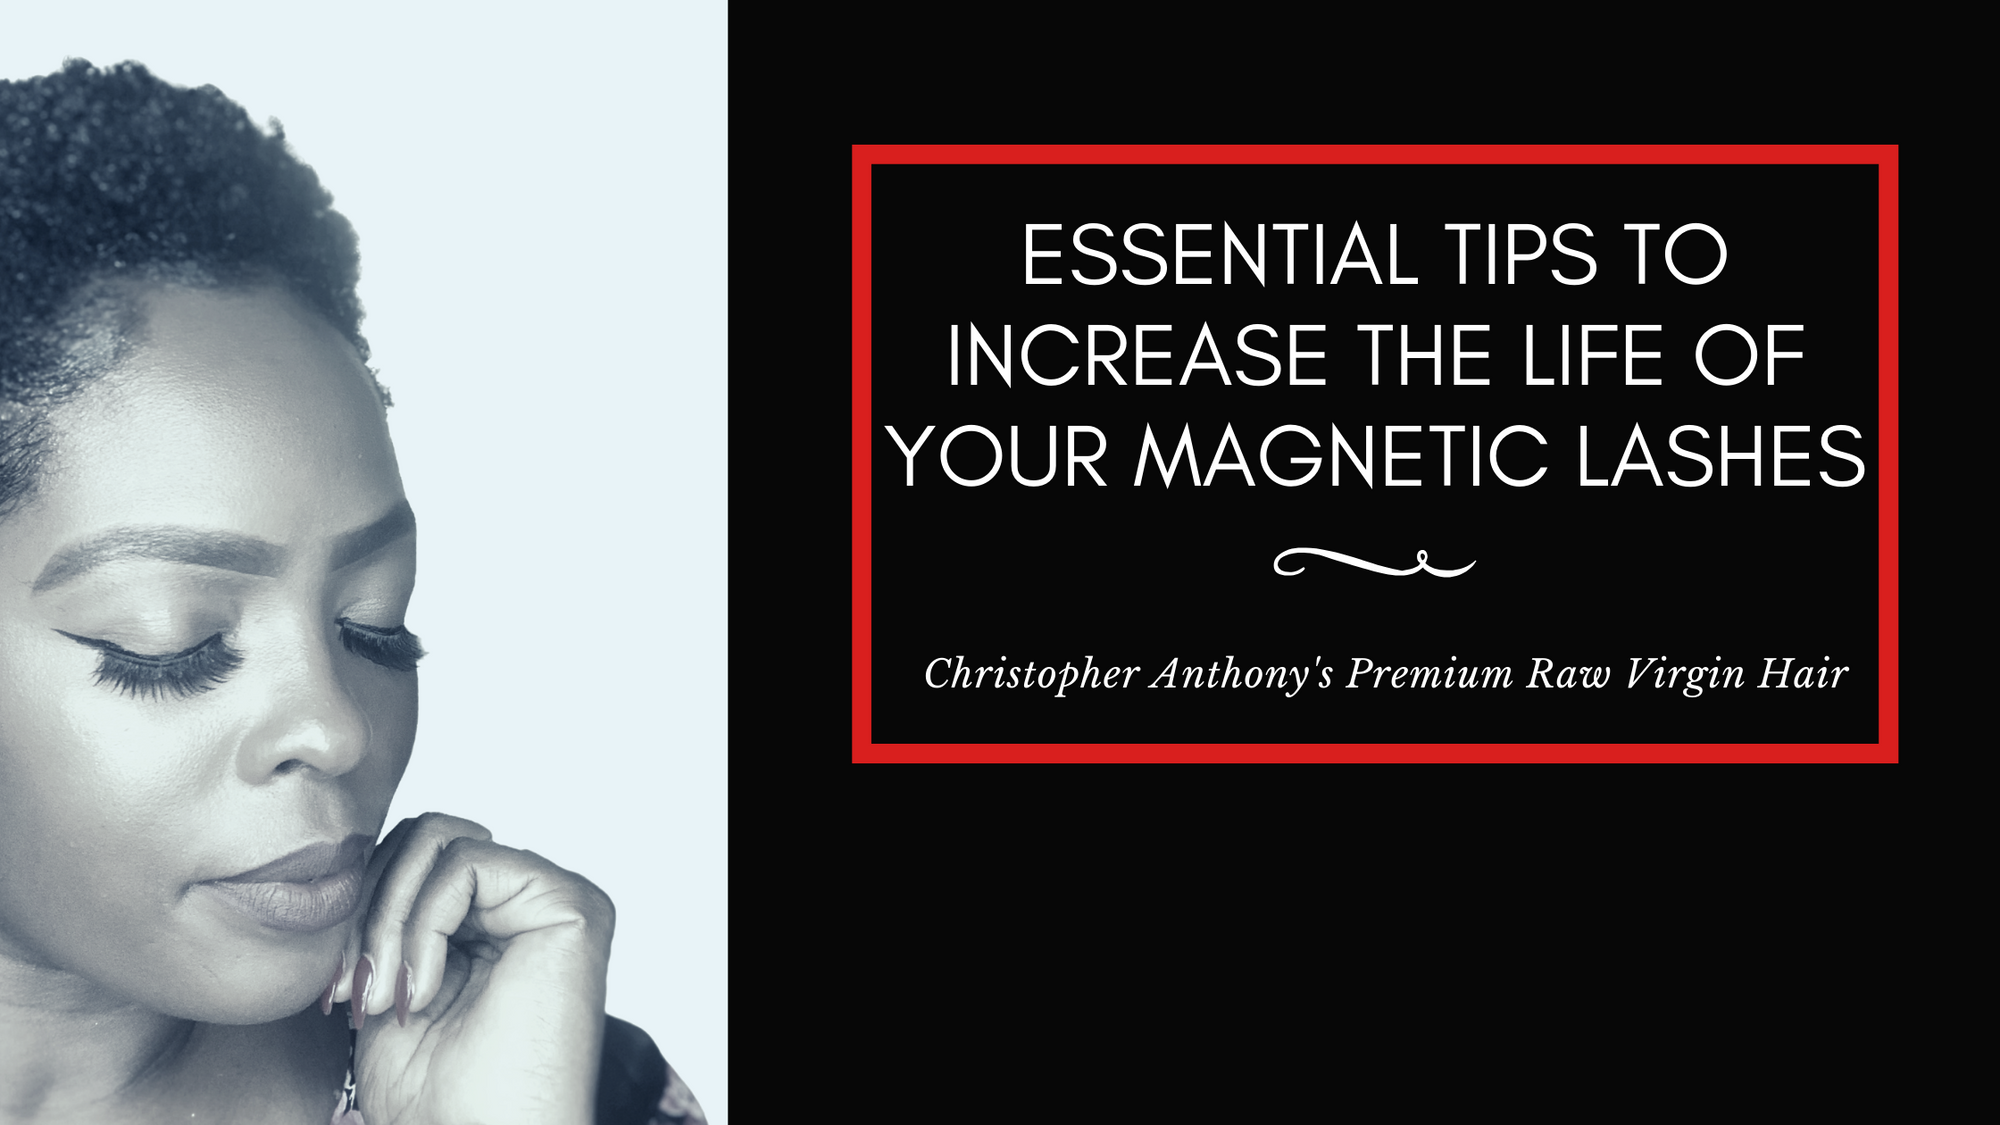 Essential Tips to Increase the Life of Your Magnetic Lashes